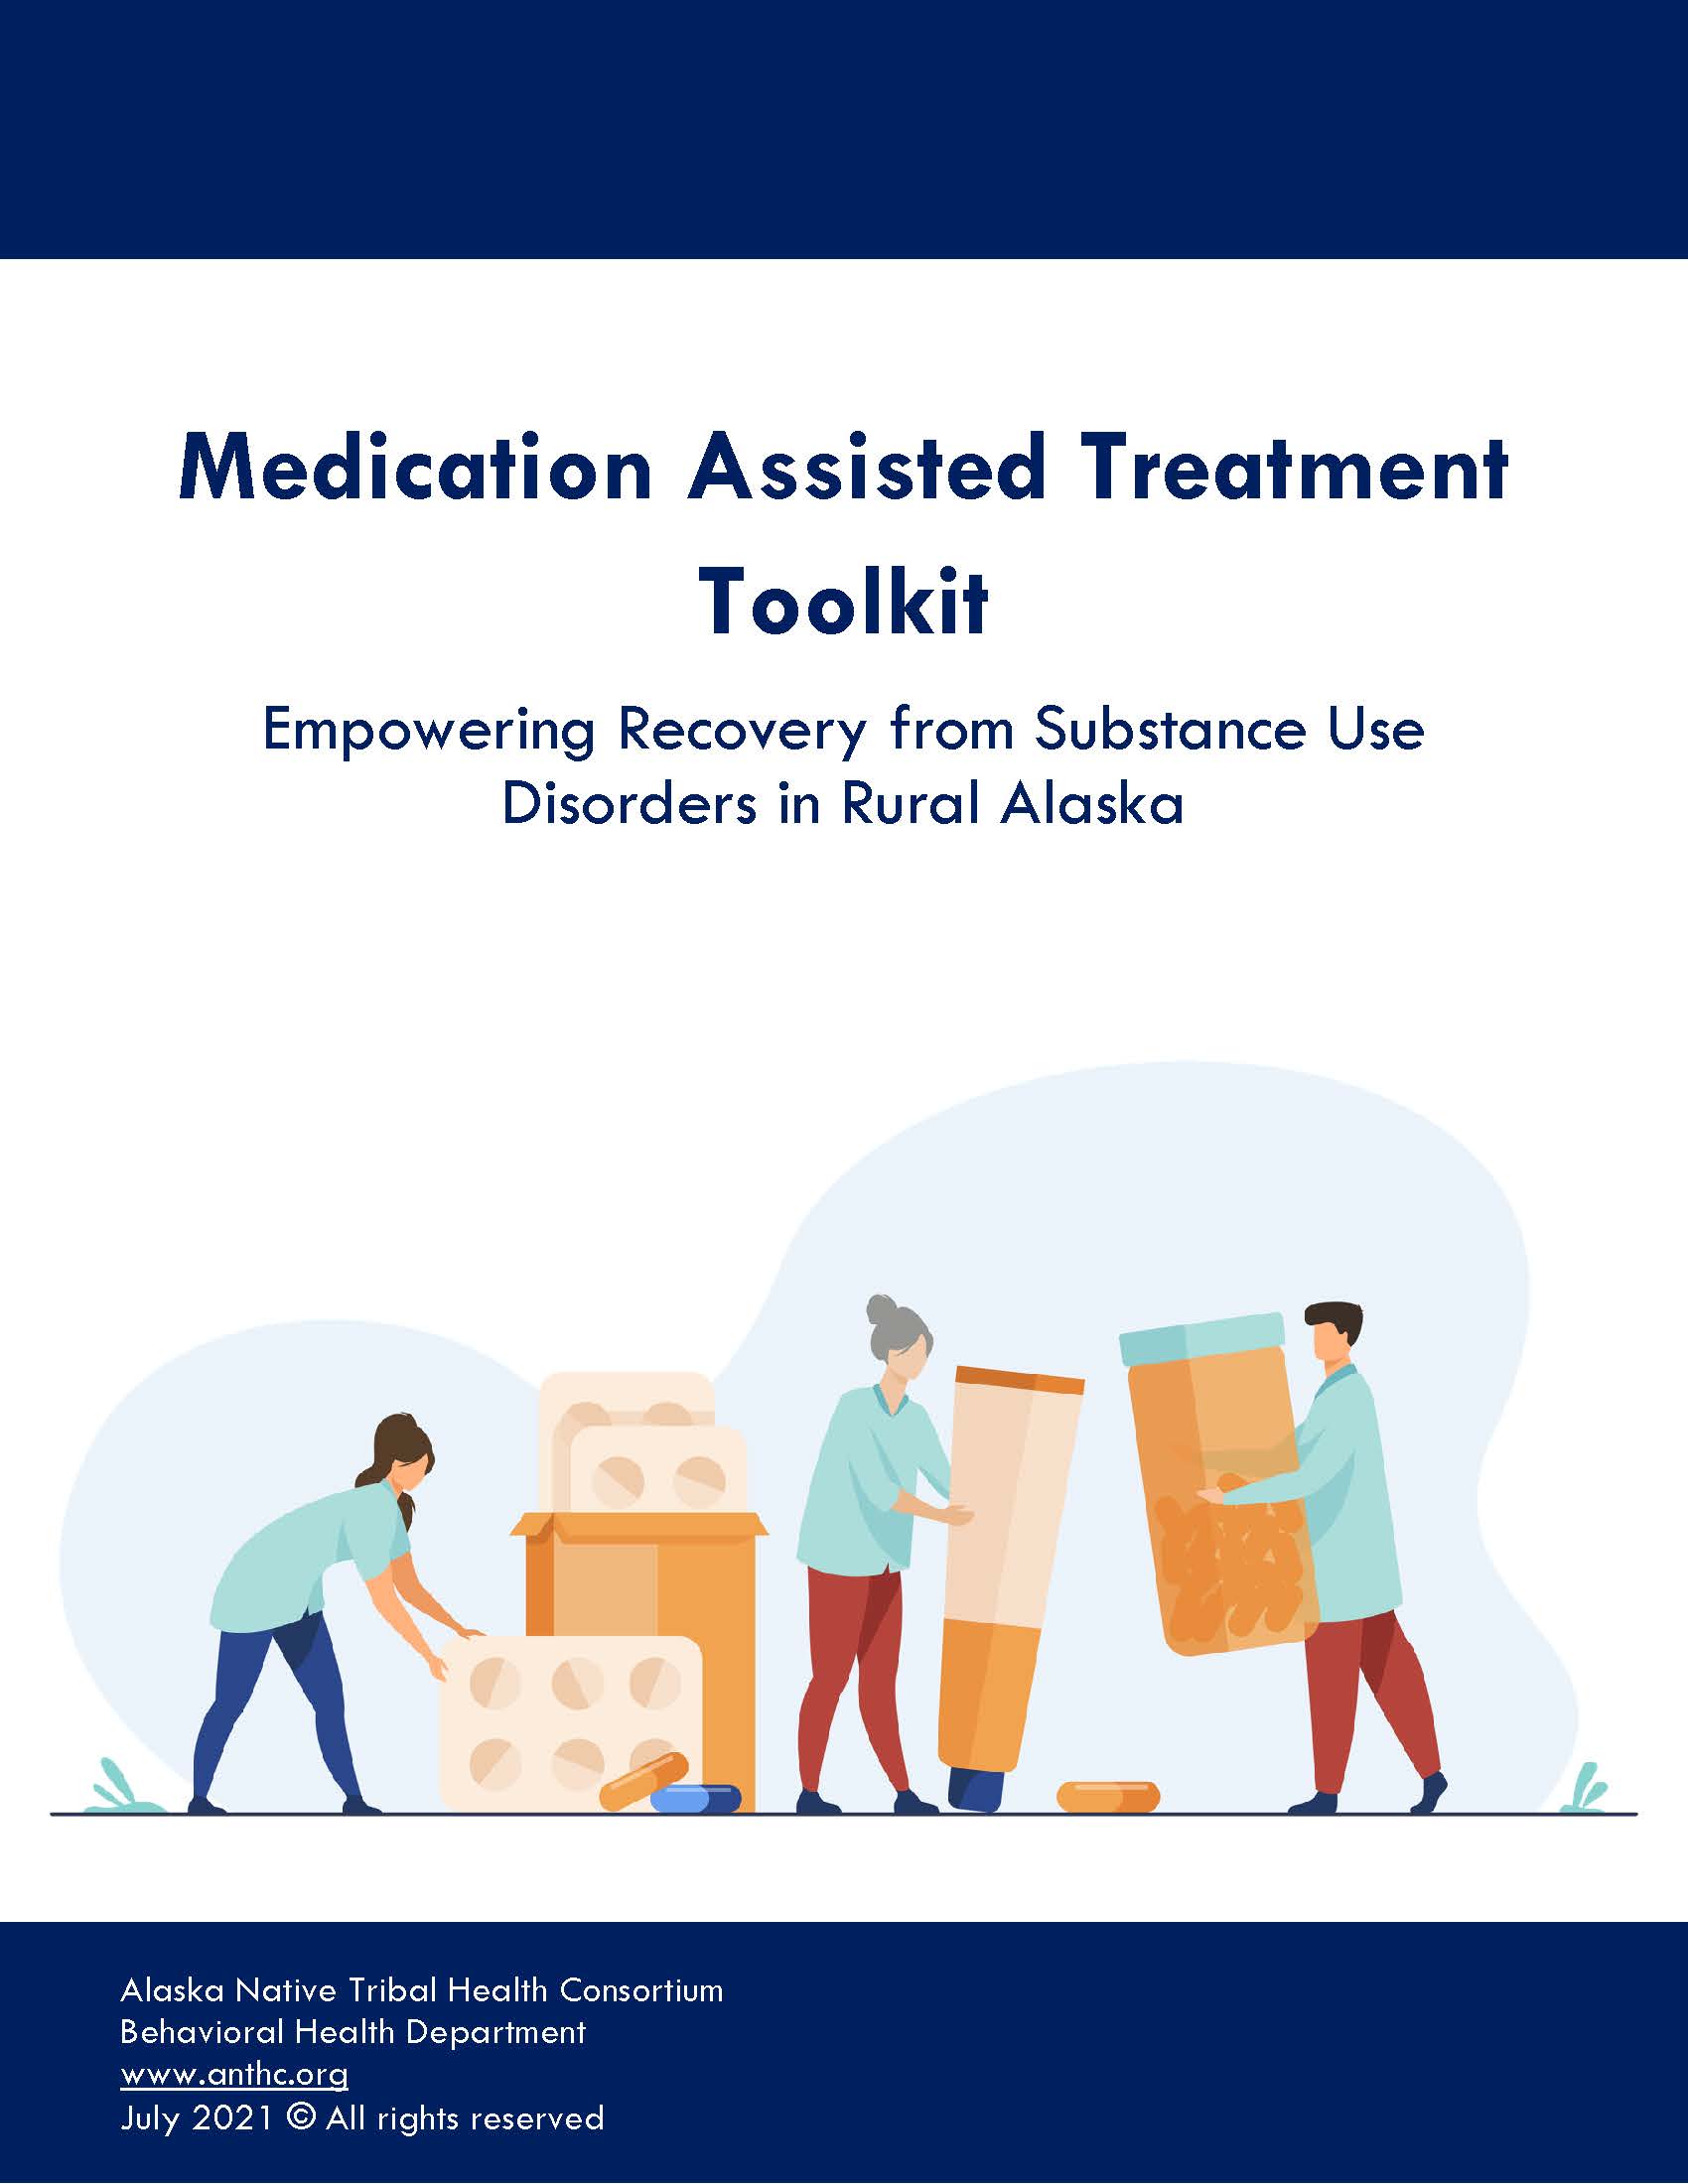 Medication Assisted Treatment Toolkit